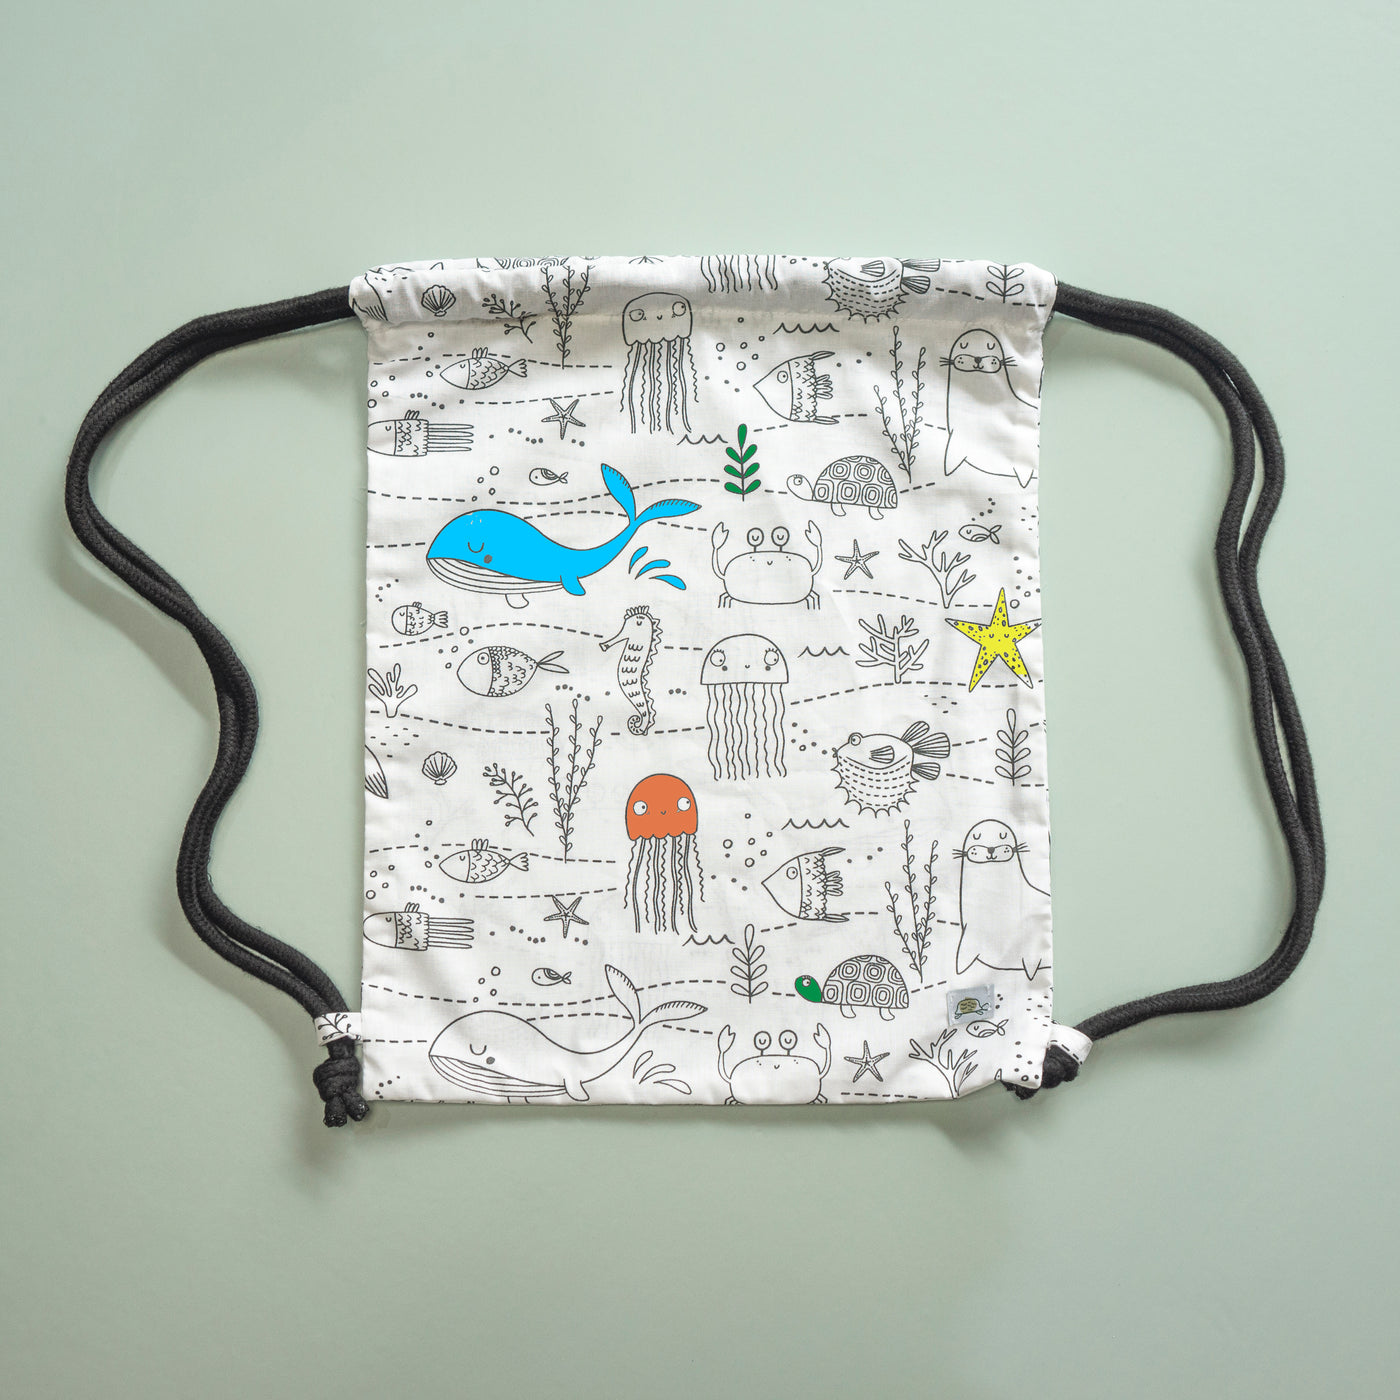 black and white bag for kids from La Tortuga Marisa